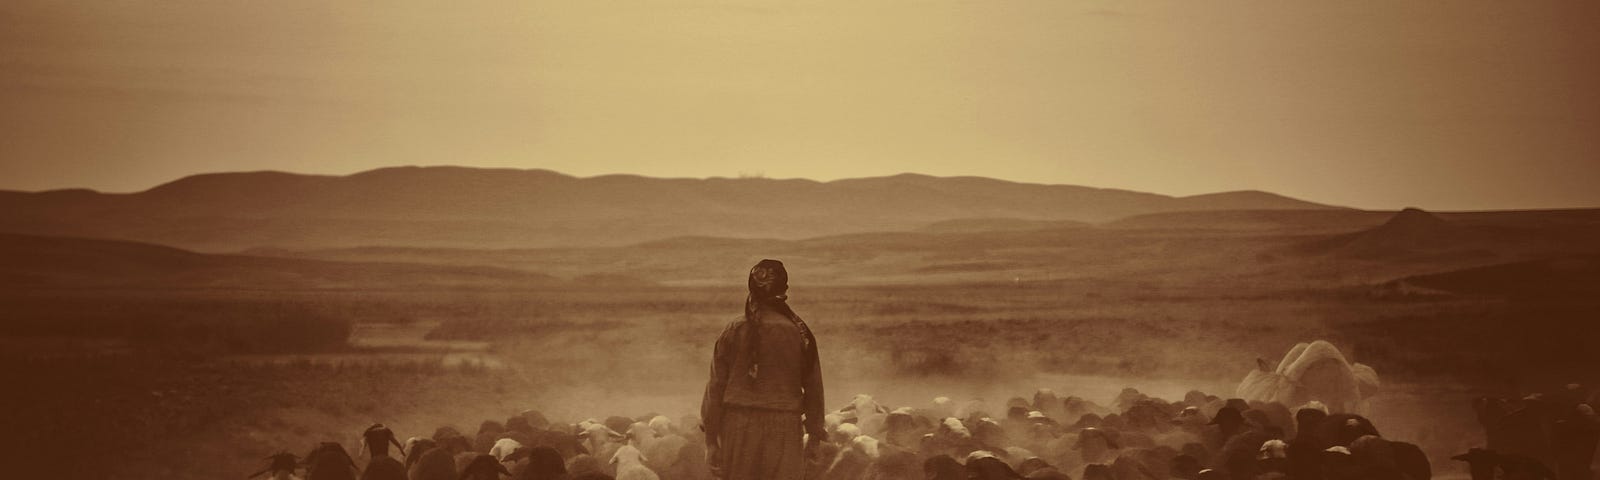 sepia-toned image of a shepherd and his sheep in a field